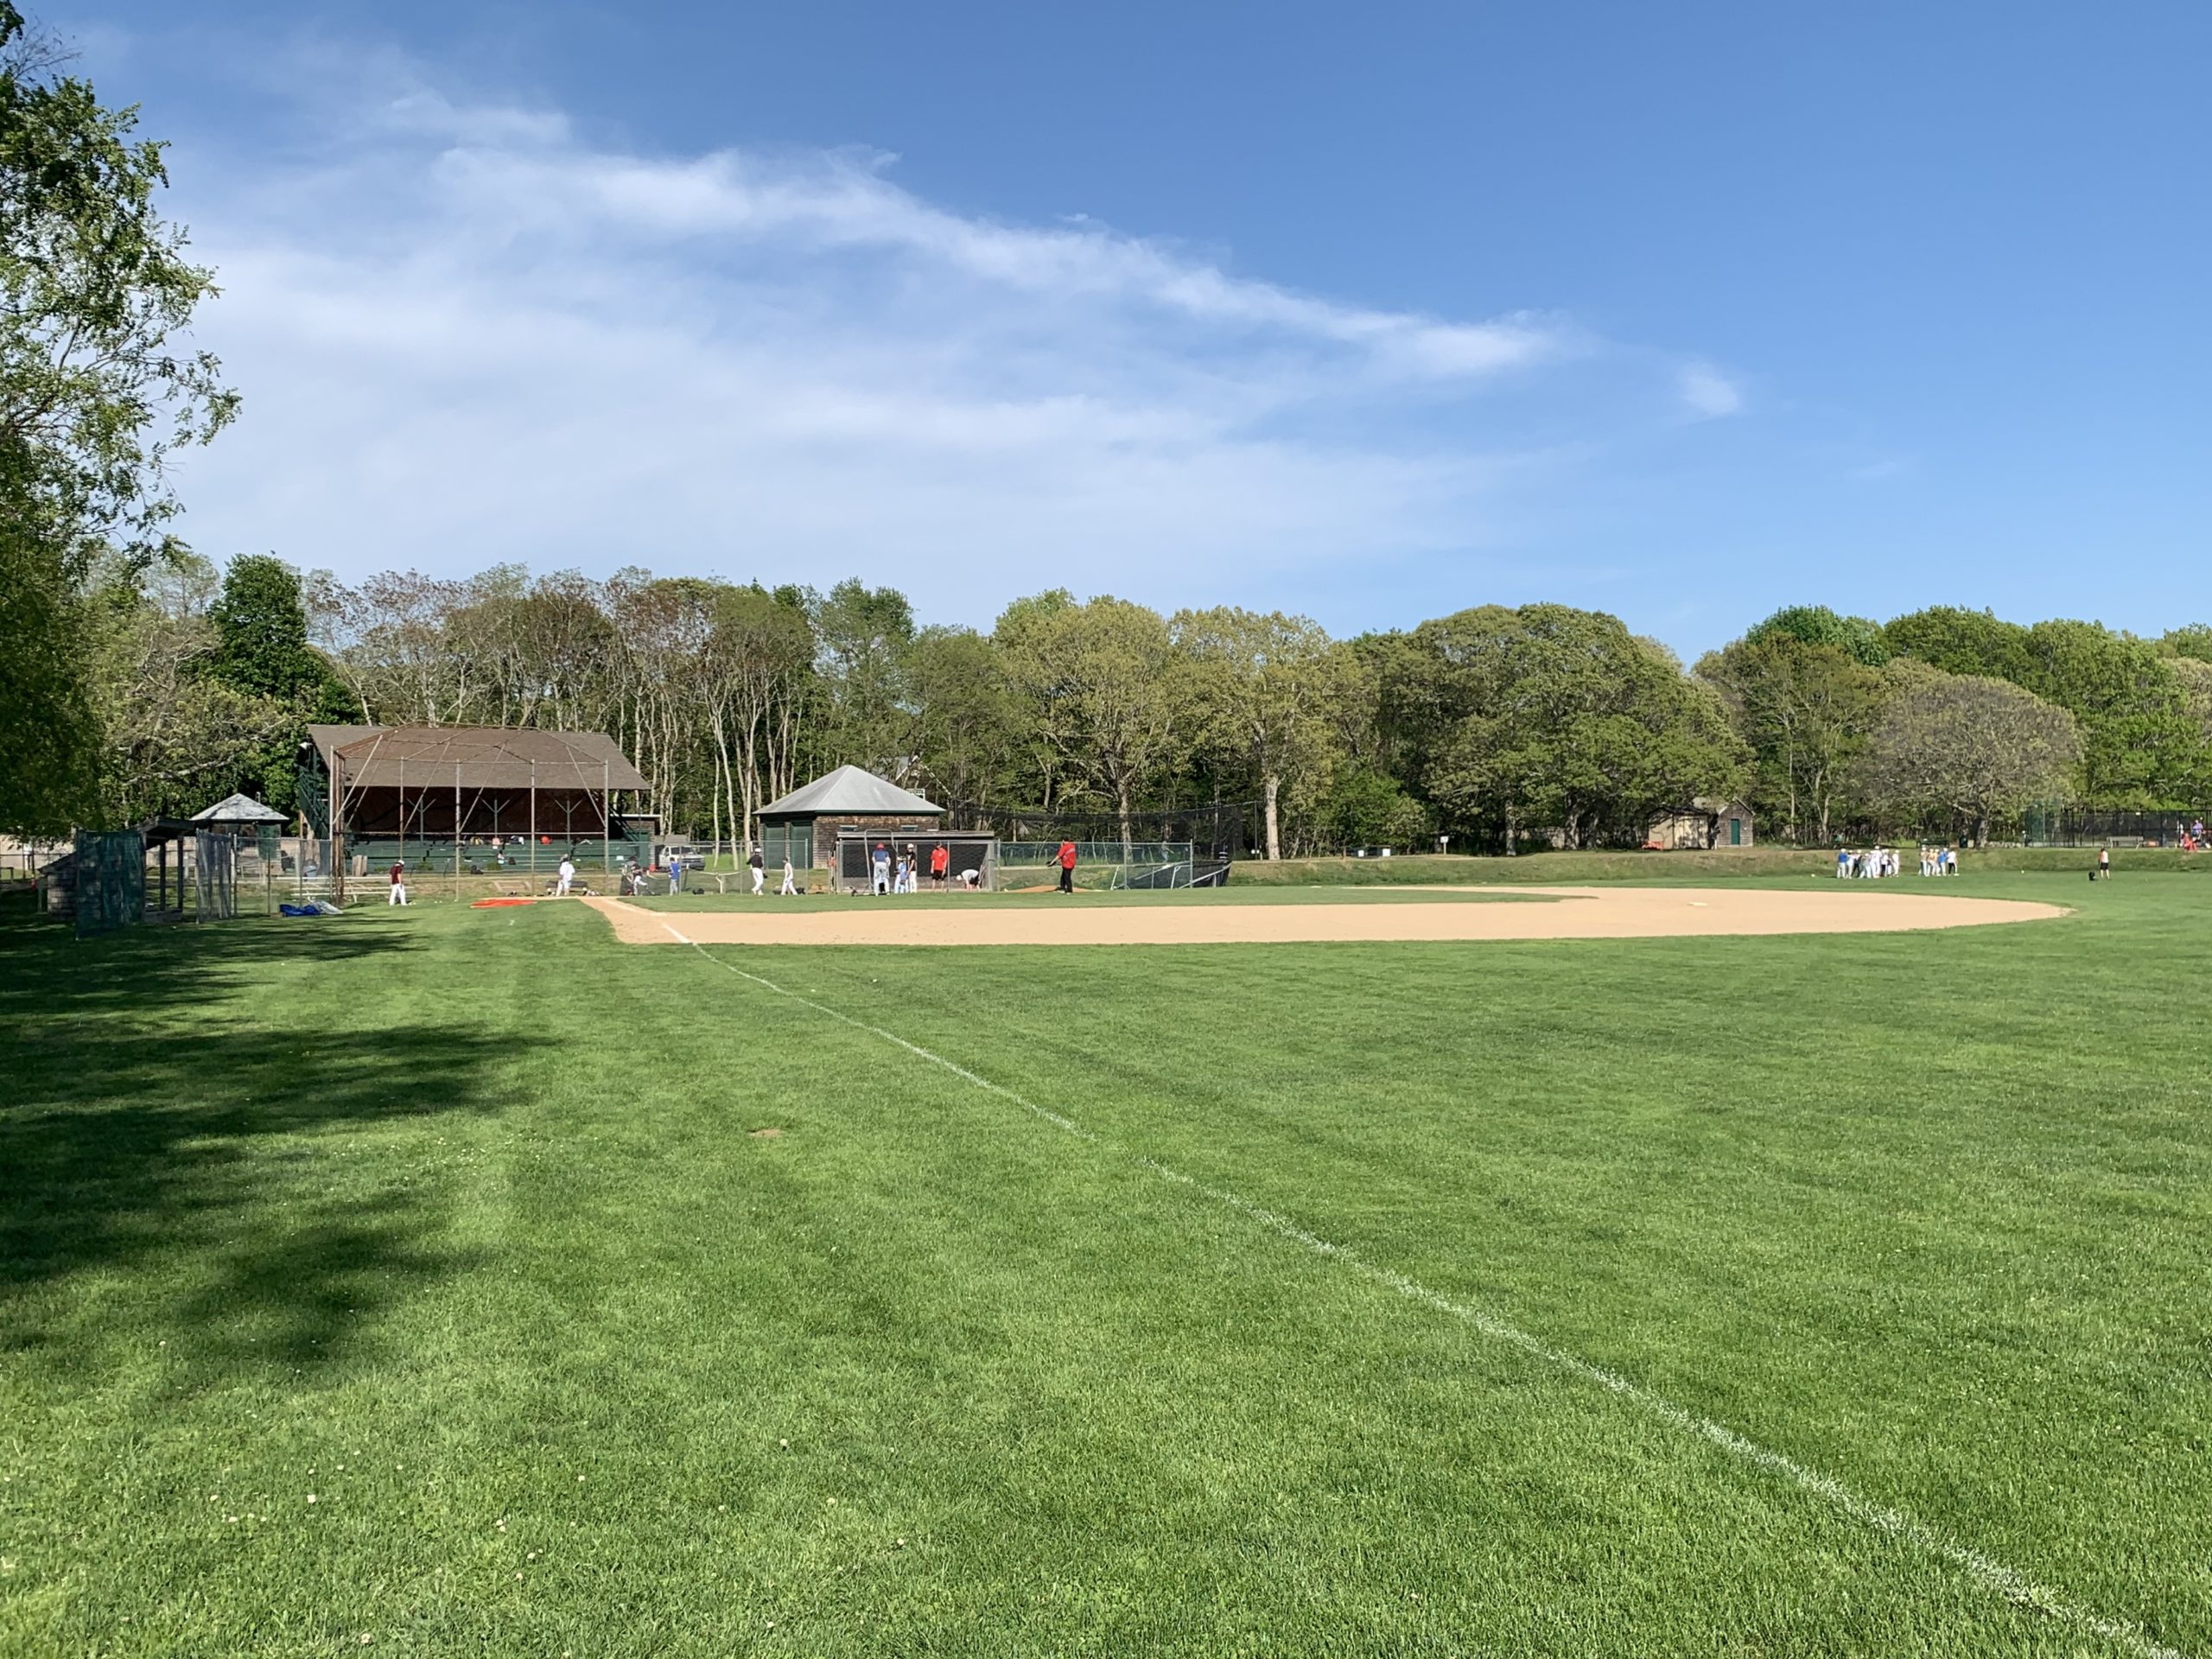 The Sag Harbor School District on Friday said it would not renew its contract with the park for the next school year.